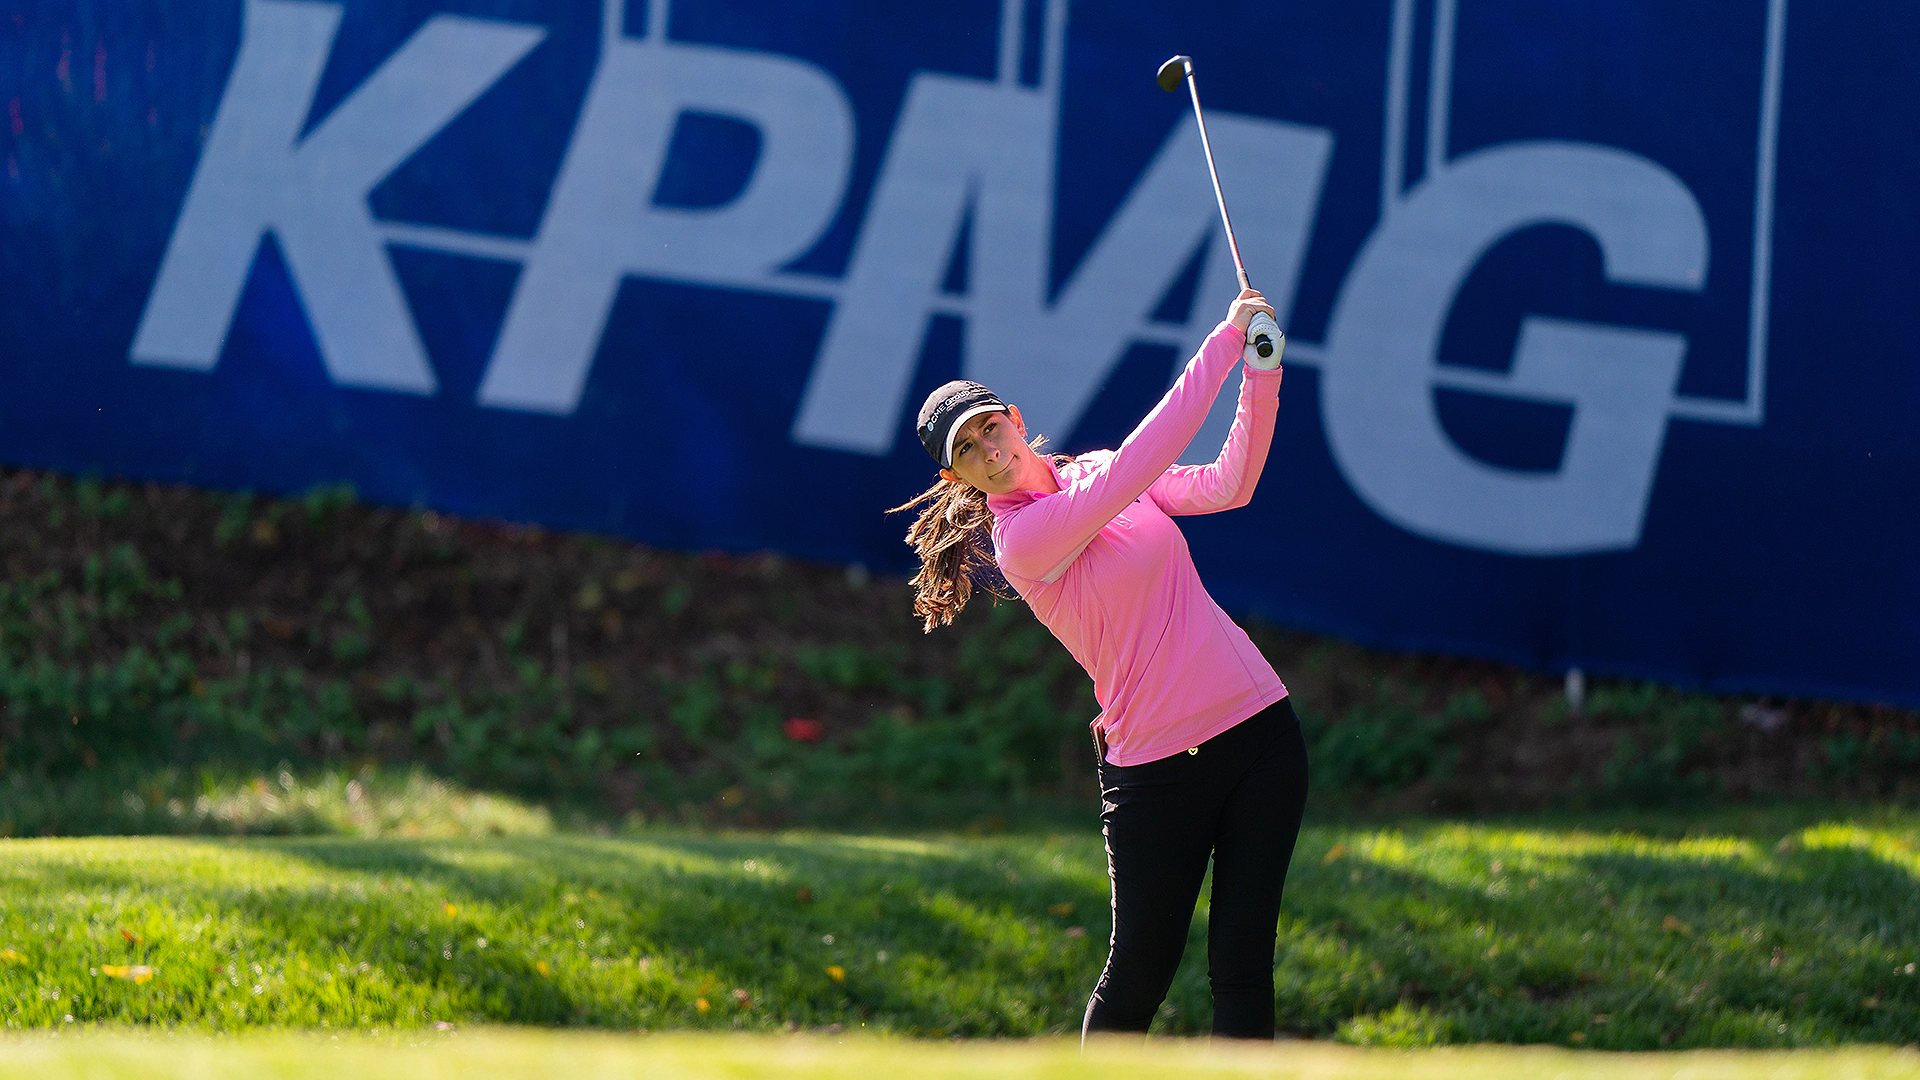 2020 KPMG Women’s PGA Championship: How to watch, news and notes